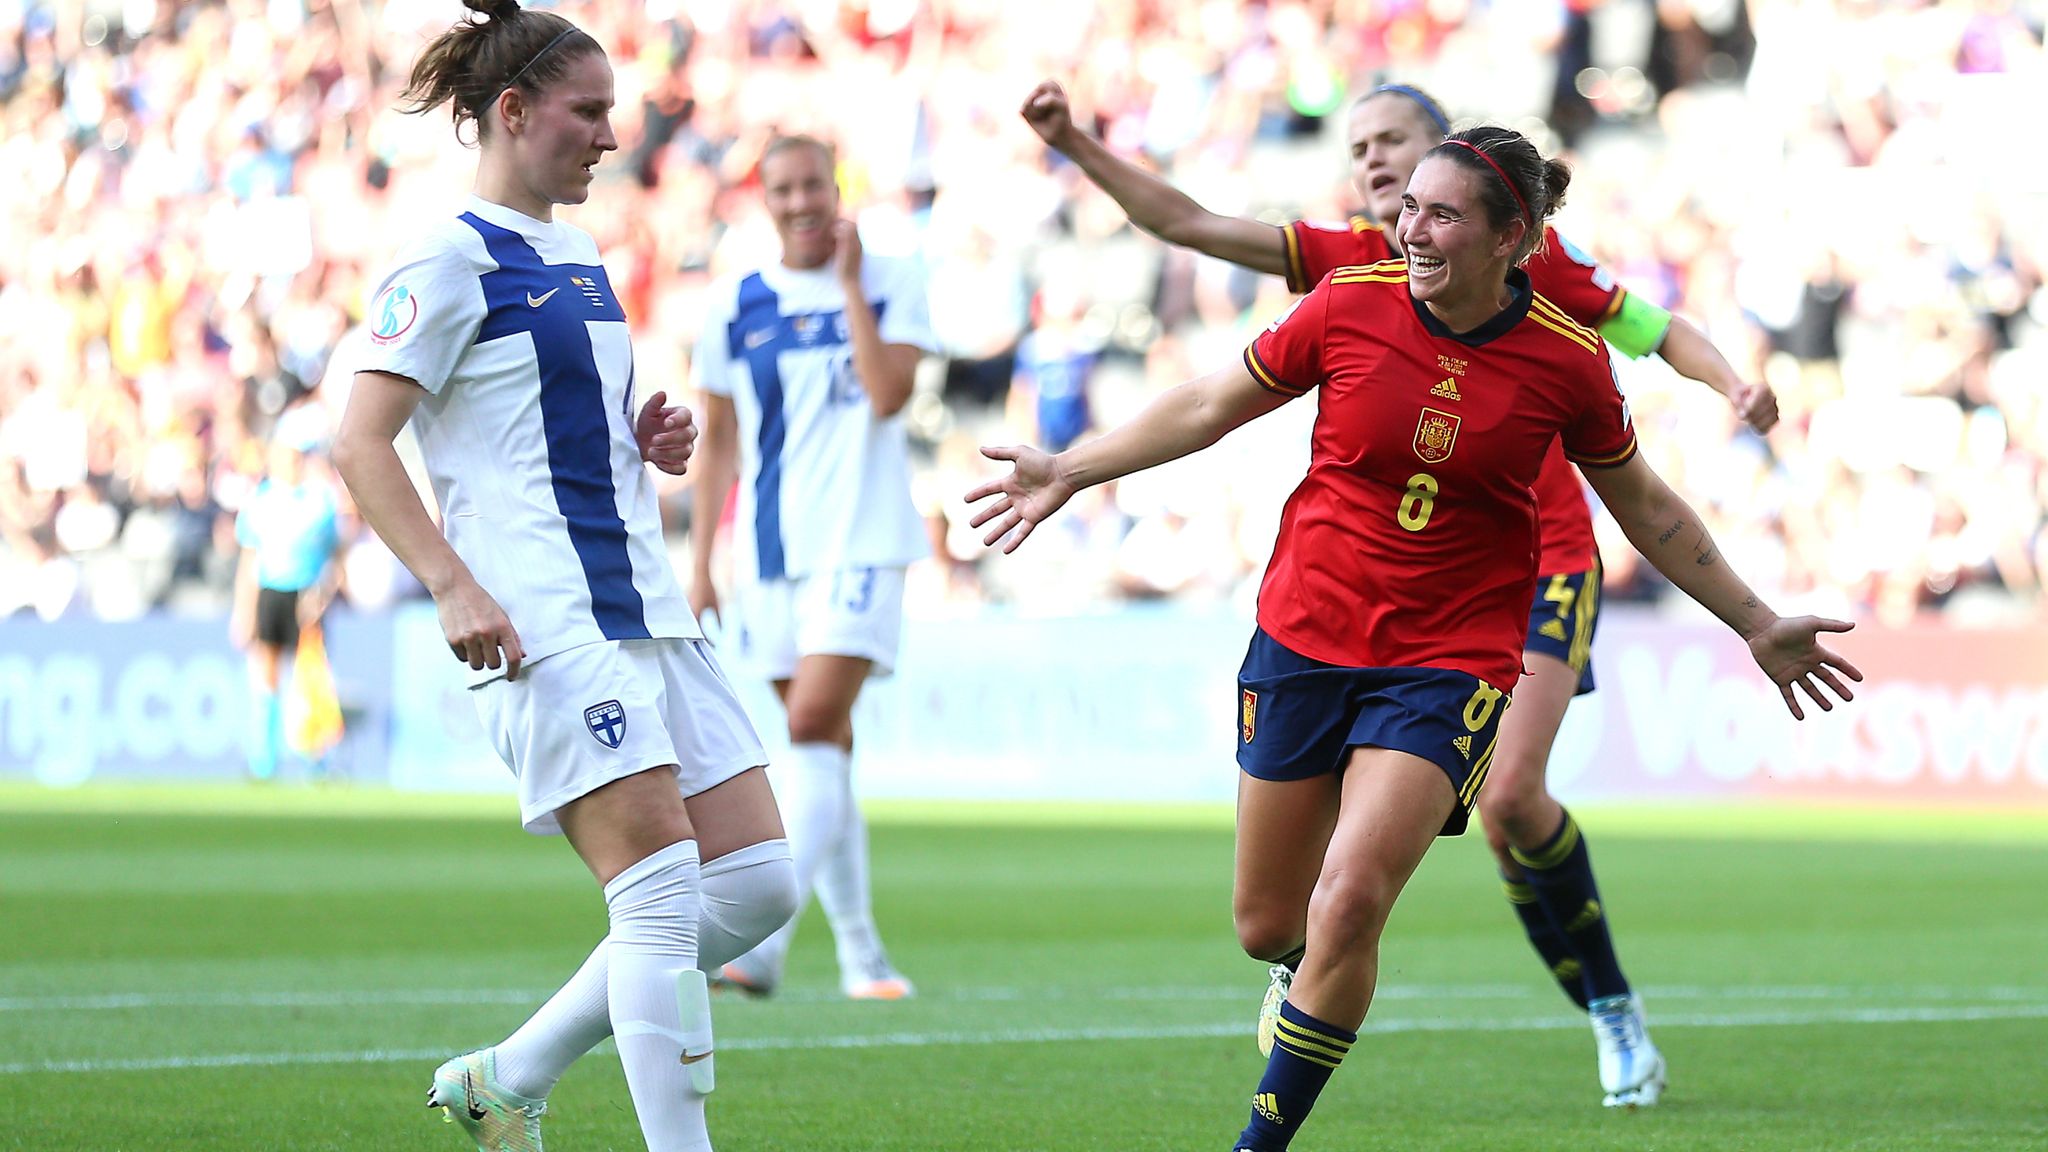 Spain Women 4 1 Finland Women: Much Fancied Spain Overturn Early Deficit To Start Euros Campaign With Win